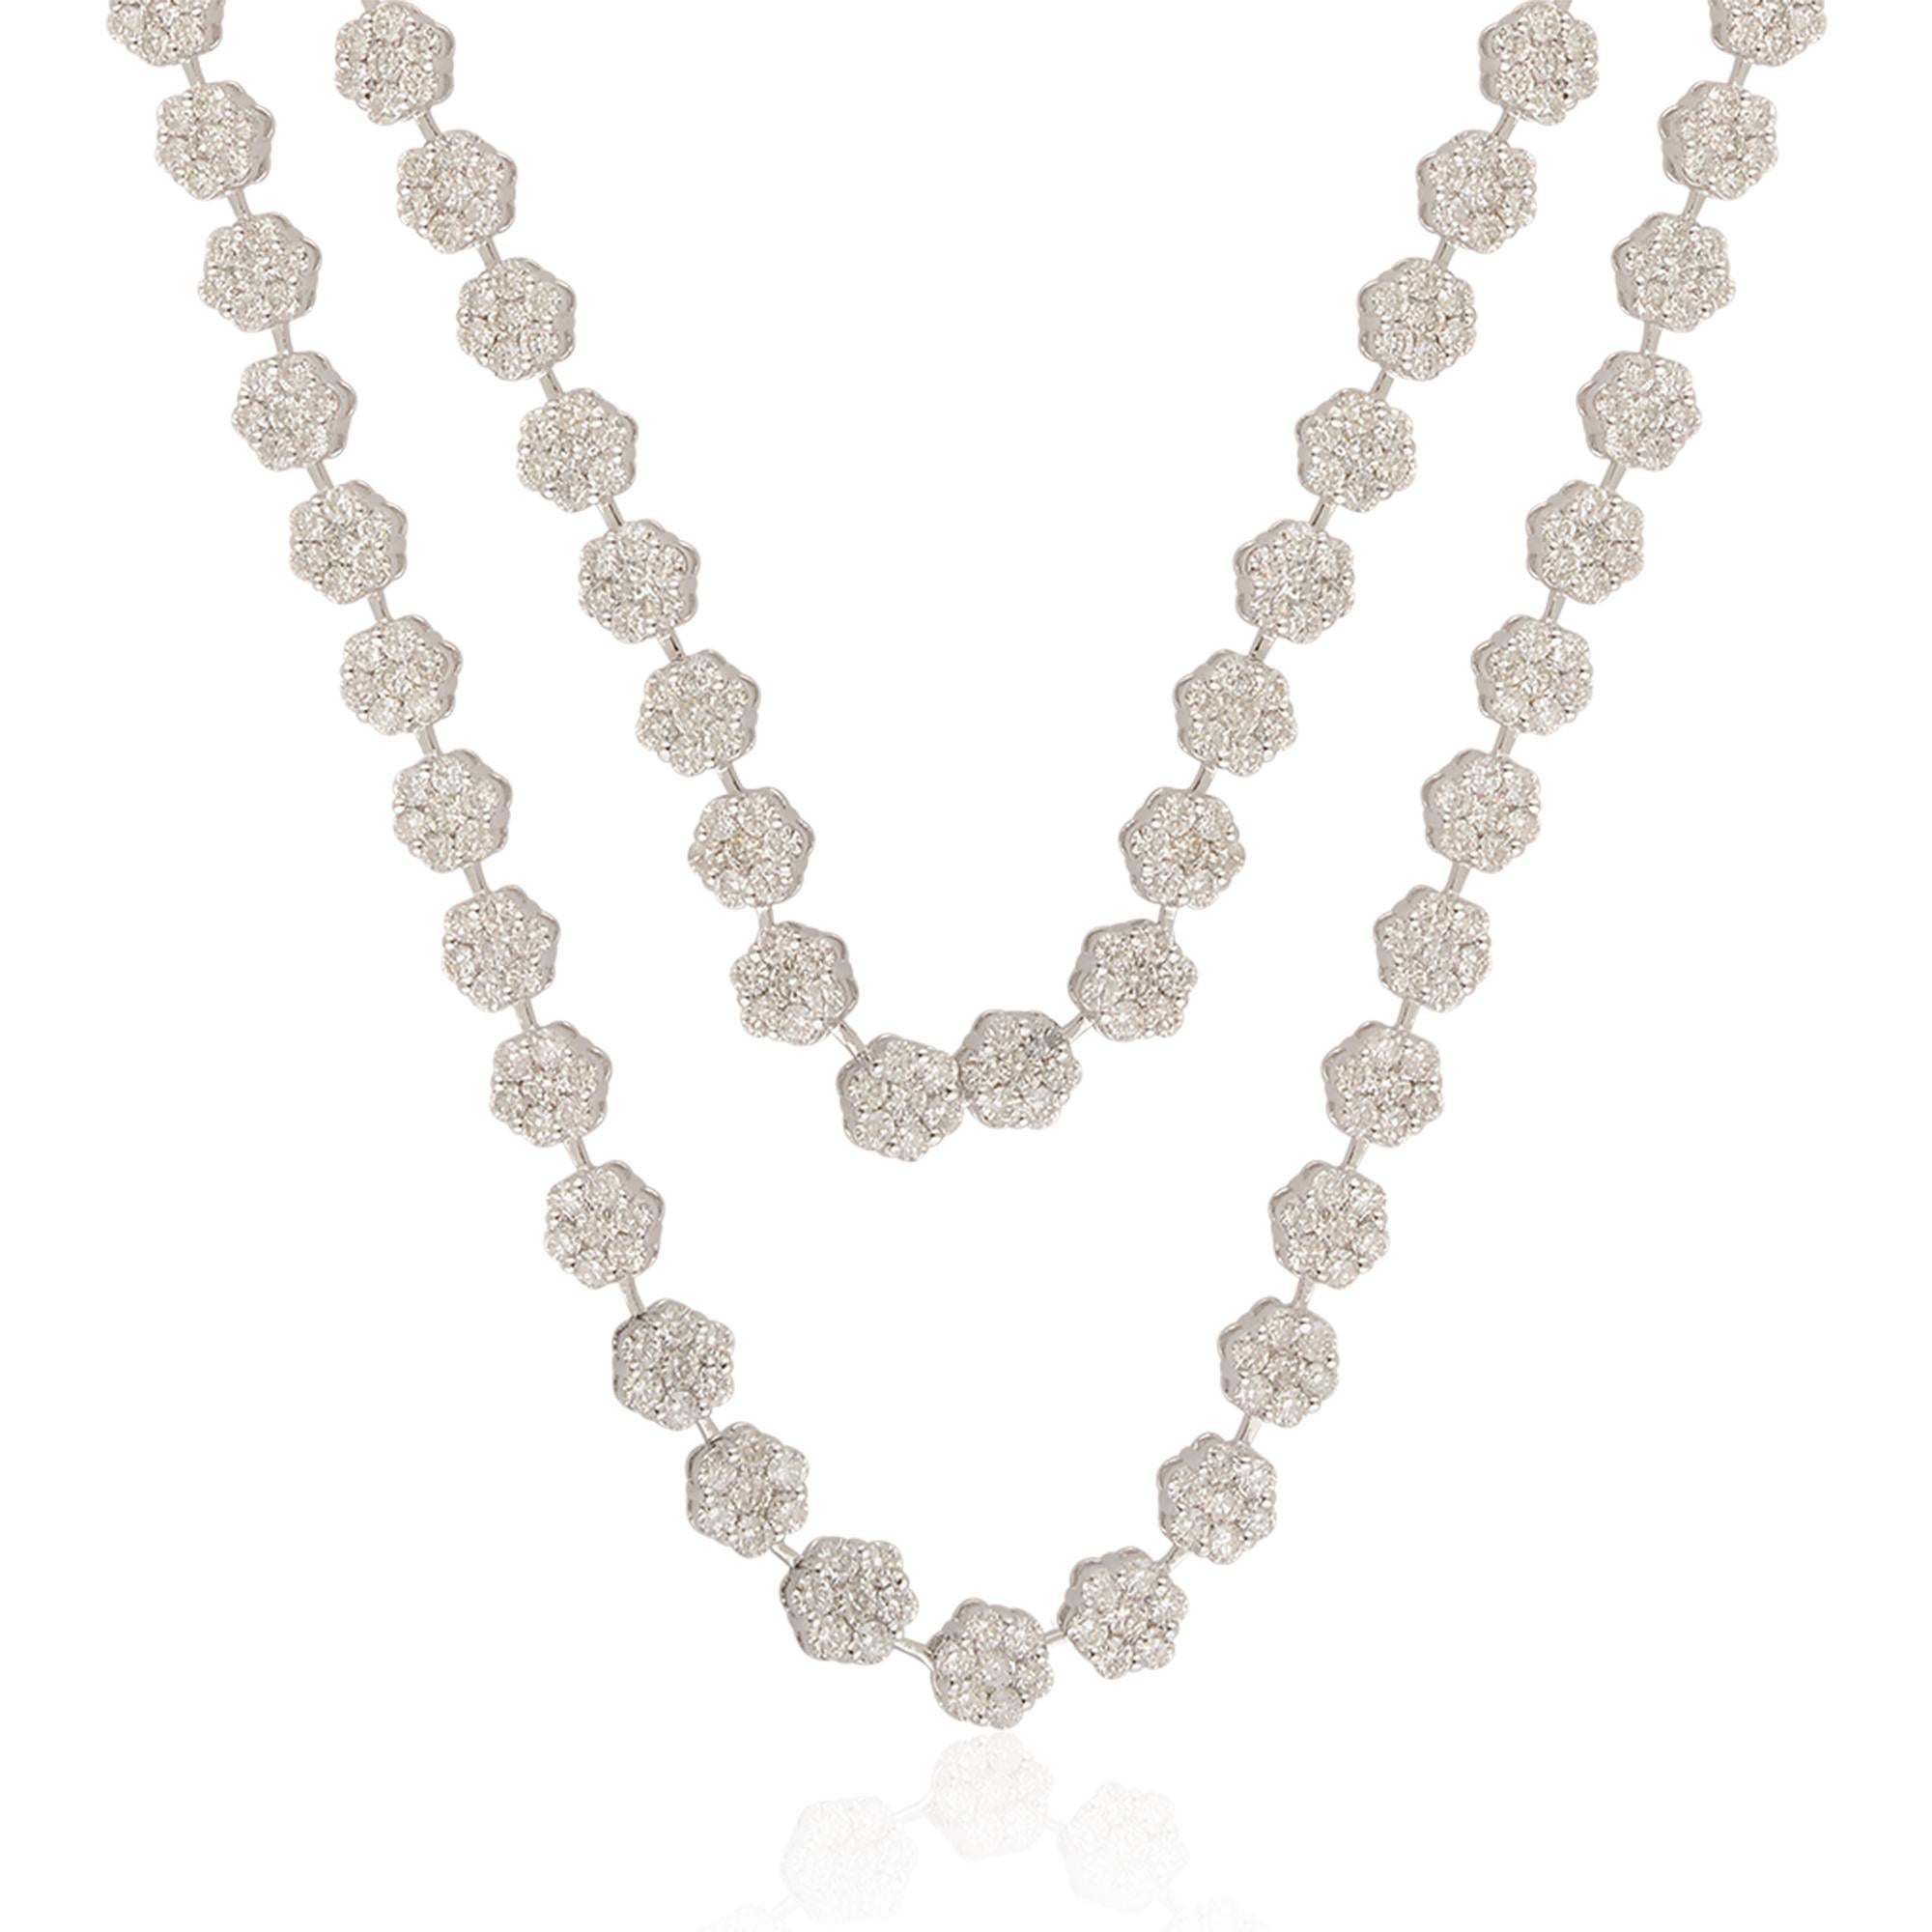 The Natural 14.20 Carat Pave Diamond Necklace in 18 karat white gold is a truly remarkable piece of jewelry, combining the beauty of diamonds, the elegance of white gold, and the expertise of handcrafted design. It is a statement piece that exudes